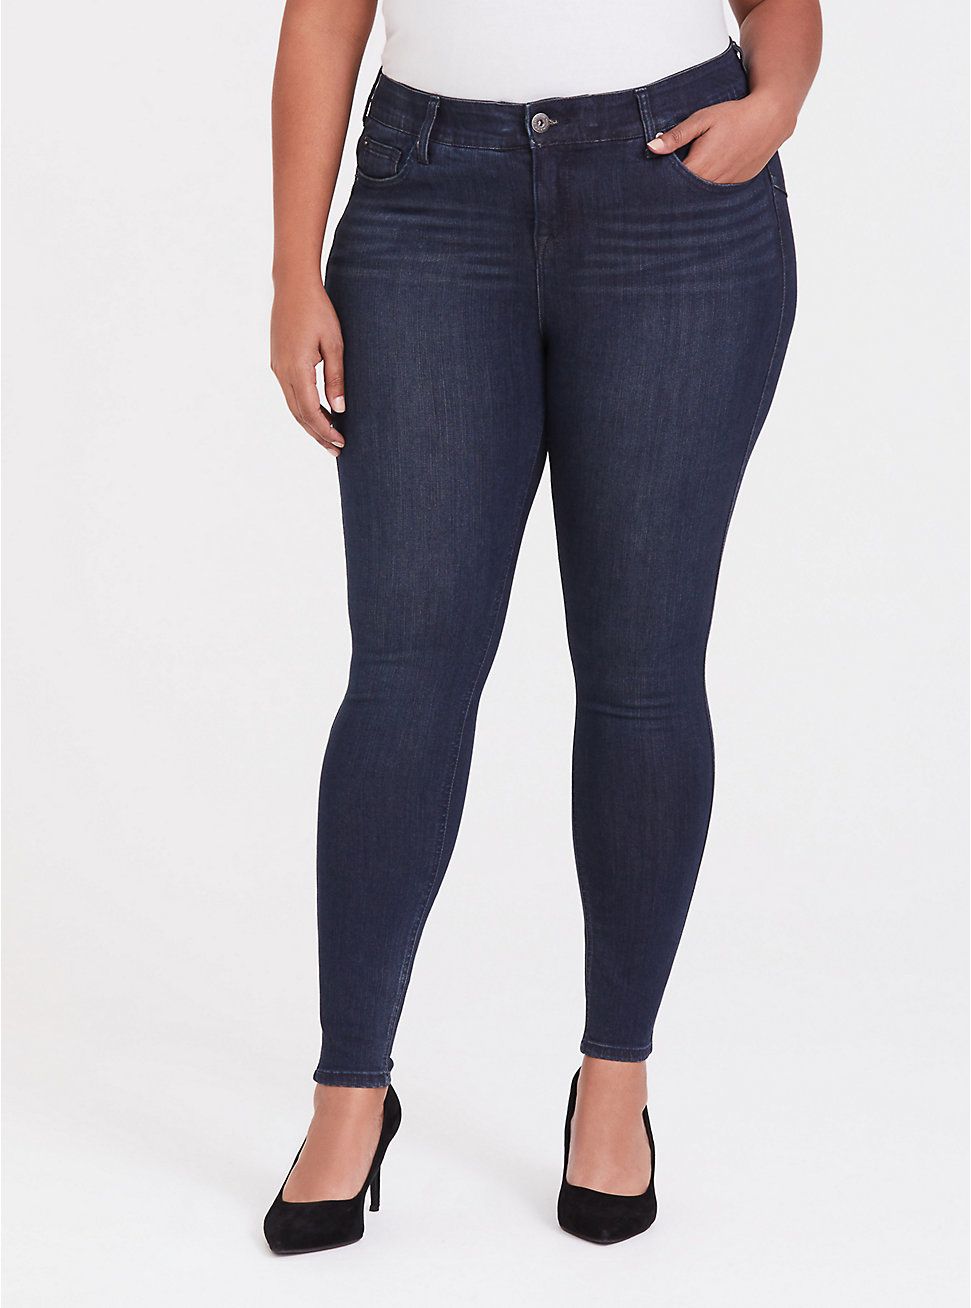 best high rise jeans for plus size